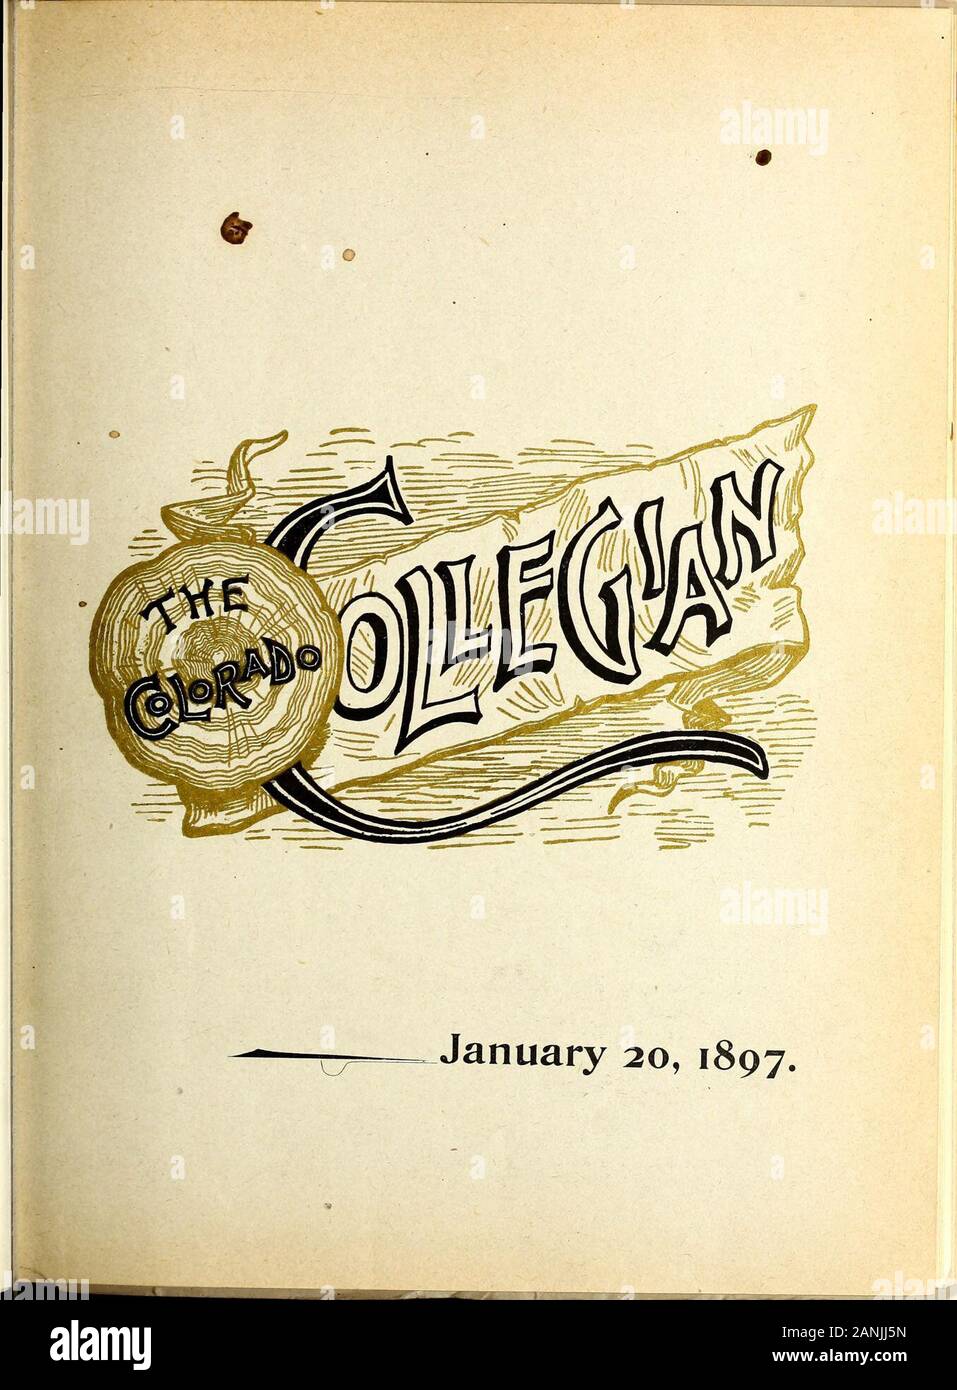 The Colorado Collegian Oct1896-June 1899 . wler, DENTIST, Rooms 1. 2 and 4. Nichols Block. OPPOSITE OIDDINGS BROS 18 S. TEJON ST. NINETEENTH CENTURY PEOPLE ^nj^lfiftiSrSSiSffl*^ U SE THE CENTURY fountain pen, The only Pen sold at THE STUDENTS BOOK STORE. PATRONIZE Harts Transfer and Carriage Co. 1 14 E. PIKES PEAK AVE. Telephone 346. Books, Stationery, Fountain Pens. terms easy College Pins, and other supplies interests mutualon sale at the ^tuderjts Book $toret PALMER HALL. CENTURY PEN CO.. Whitewater. Wis. La«ic4»&lt;§^T3!^£«*^P^STT^§-0^ Wanted-An Idea Who can thinkof some simplething to pa Stock Photo